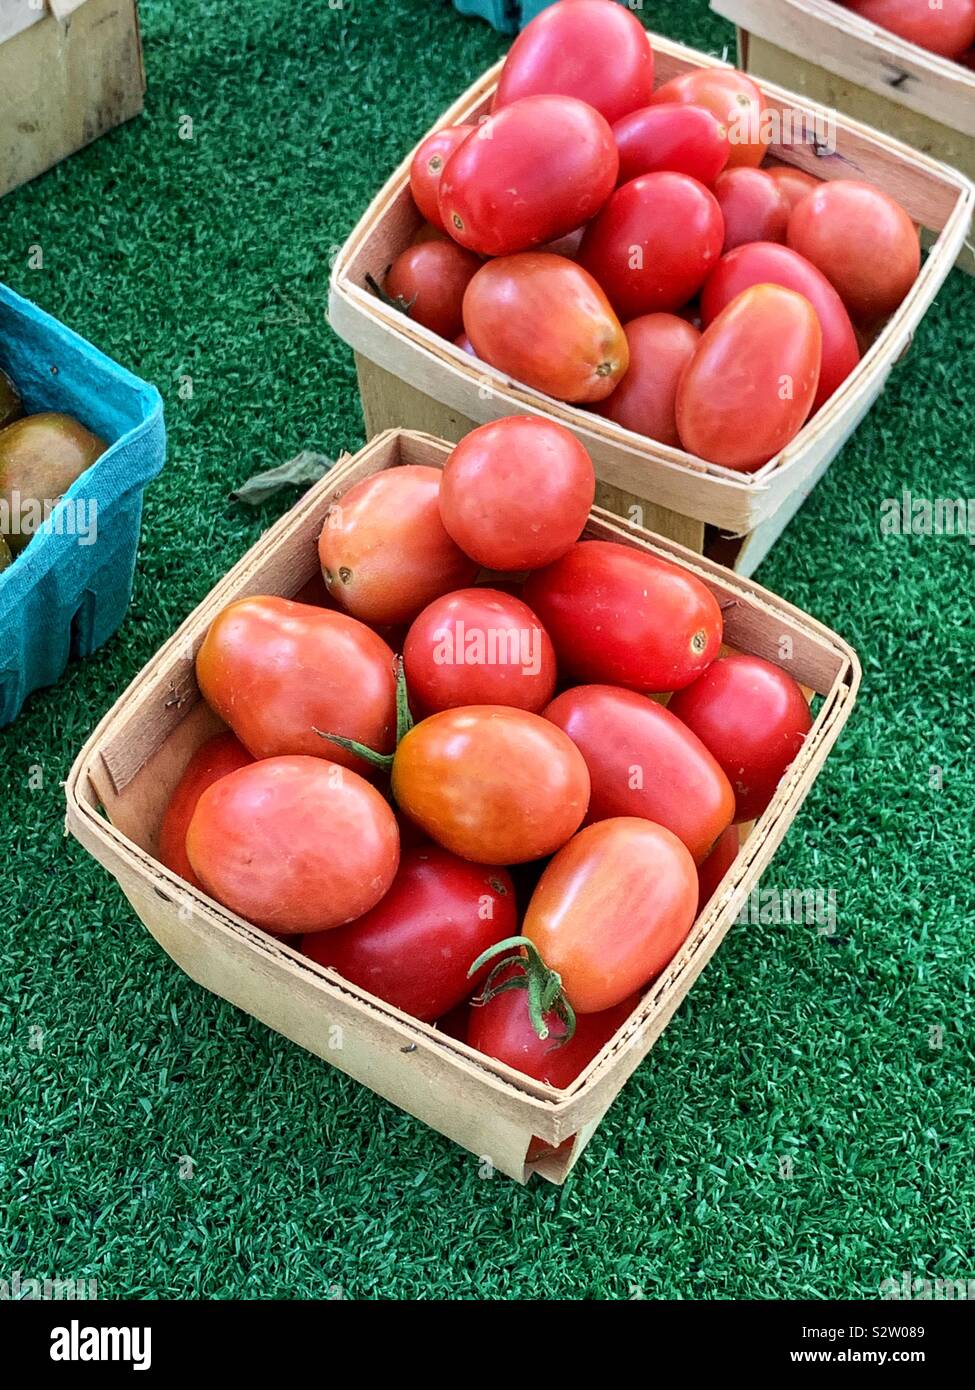 Farm fresh small red ripe tomatoes in wooden berry baskets at the farmers market. Stock Photo